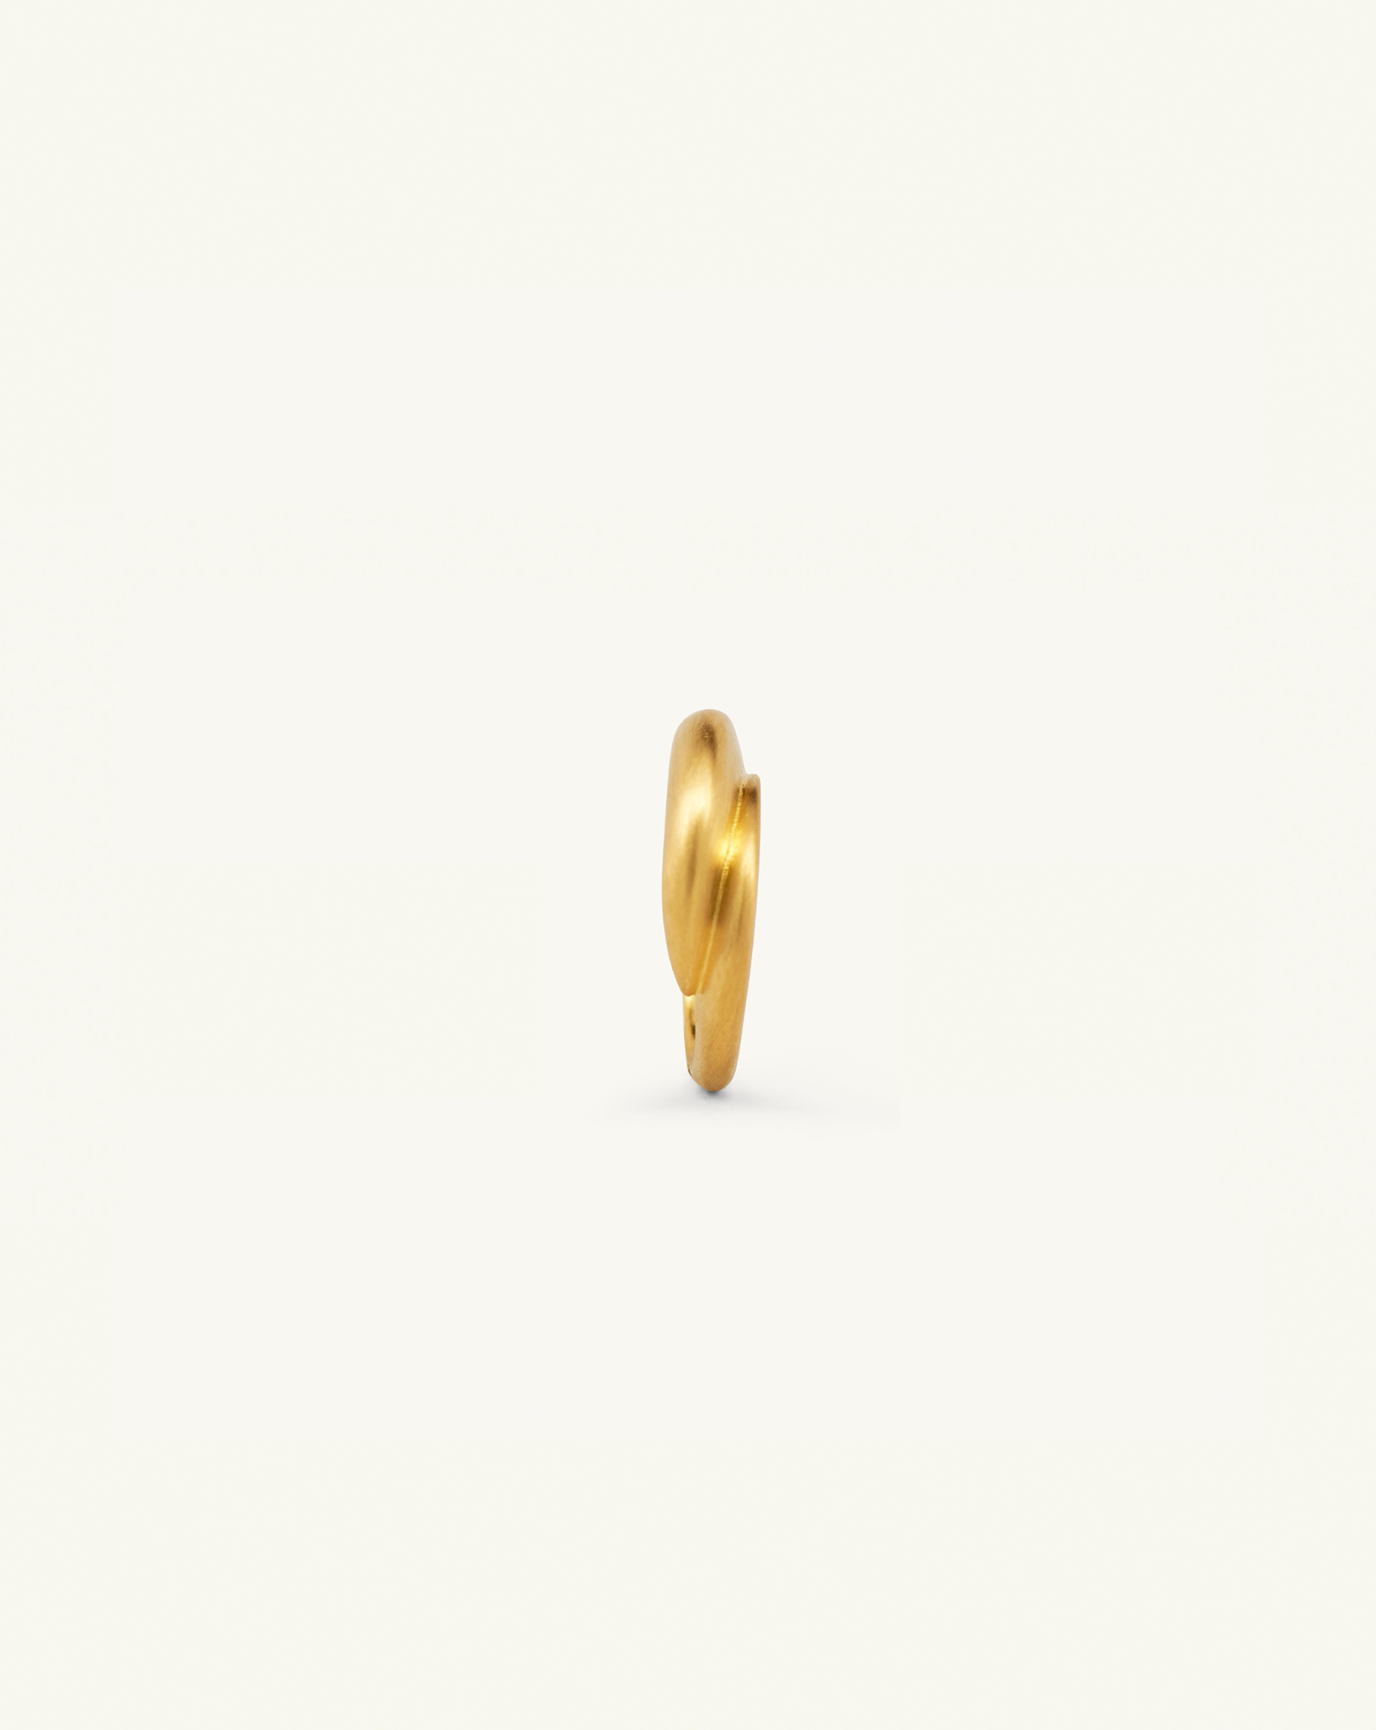 Product image of the sculptural ring in gold